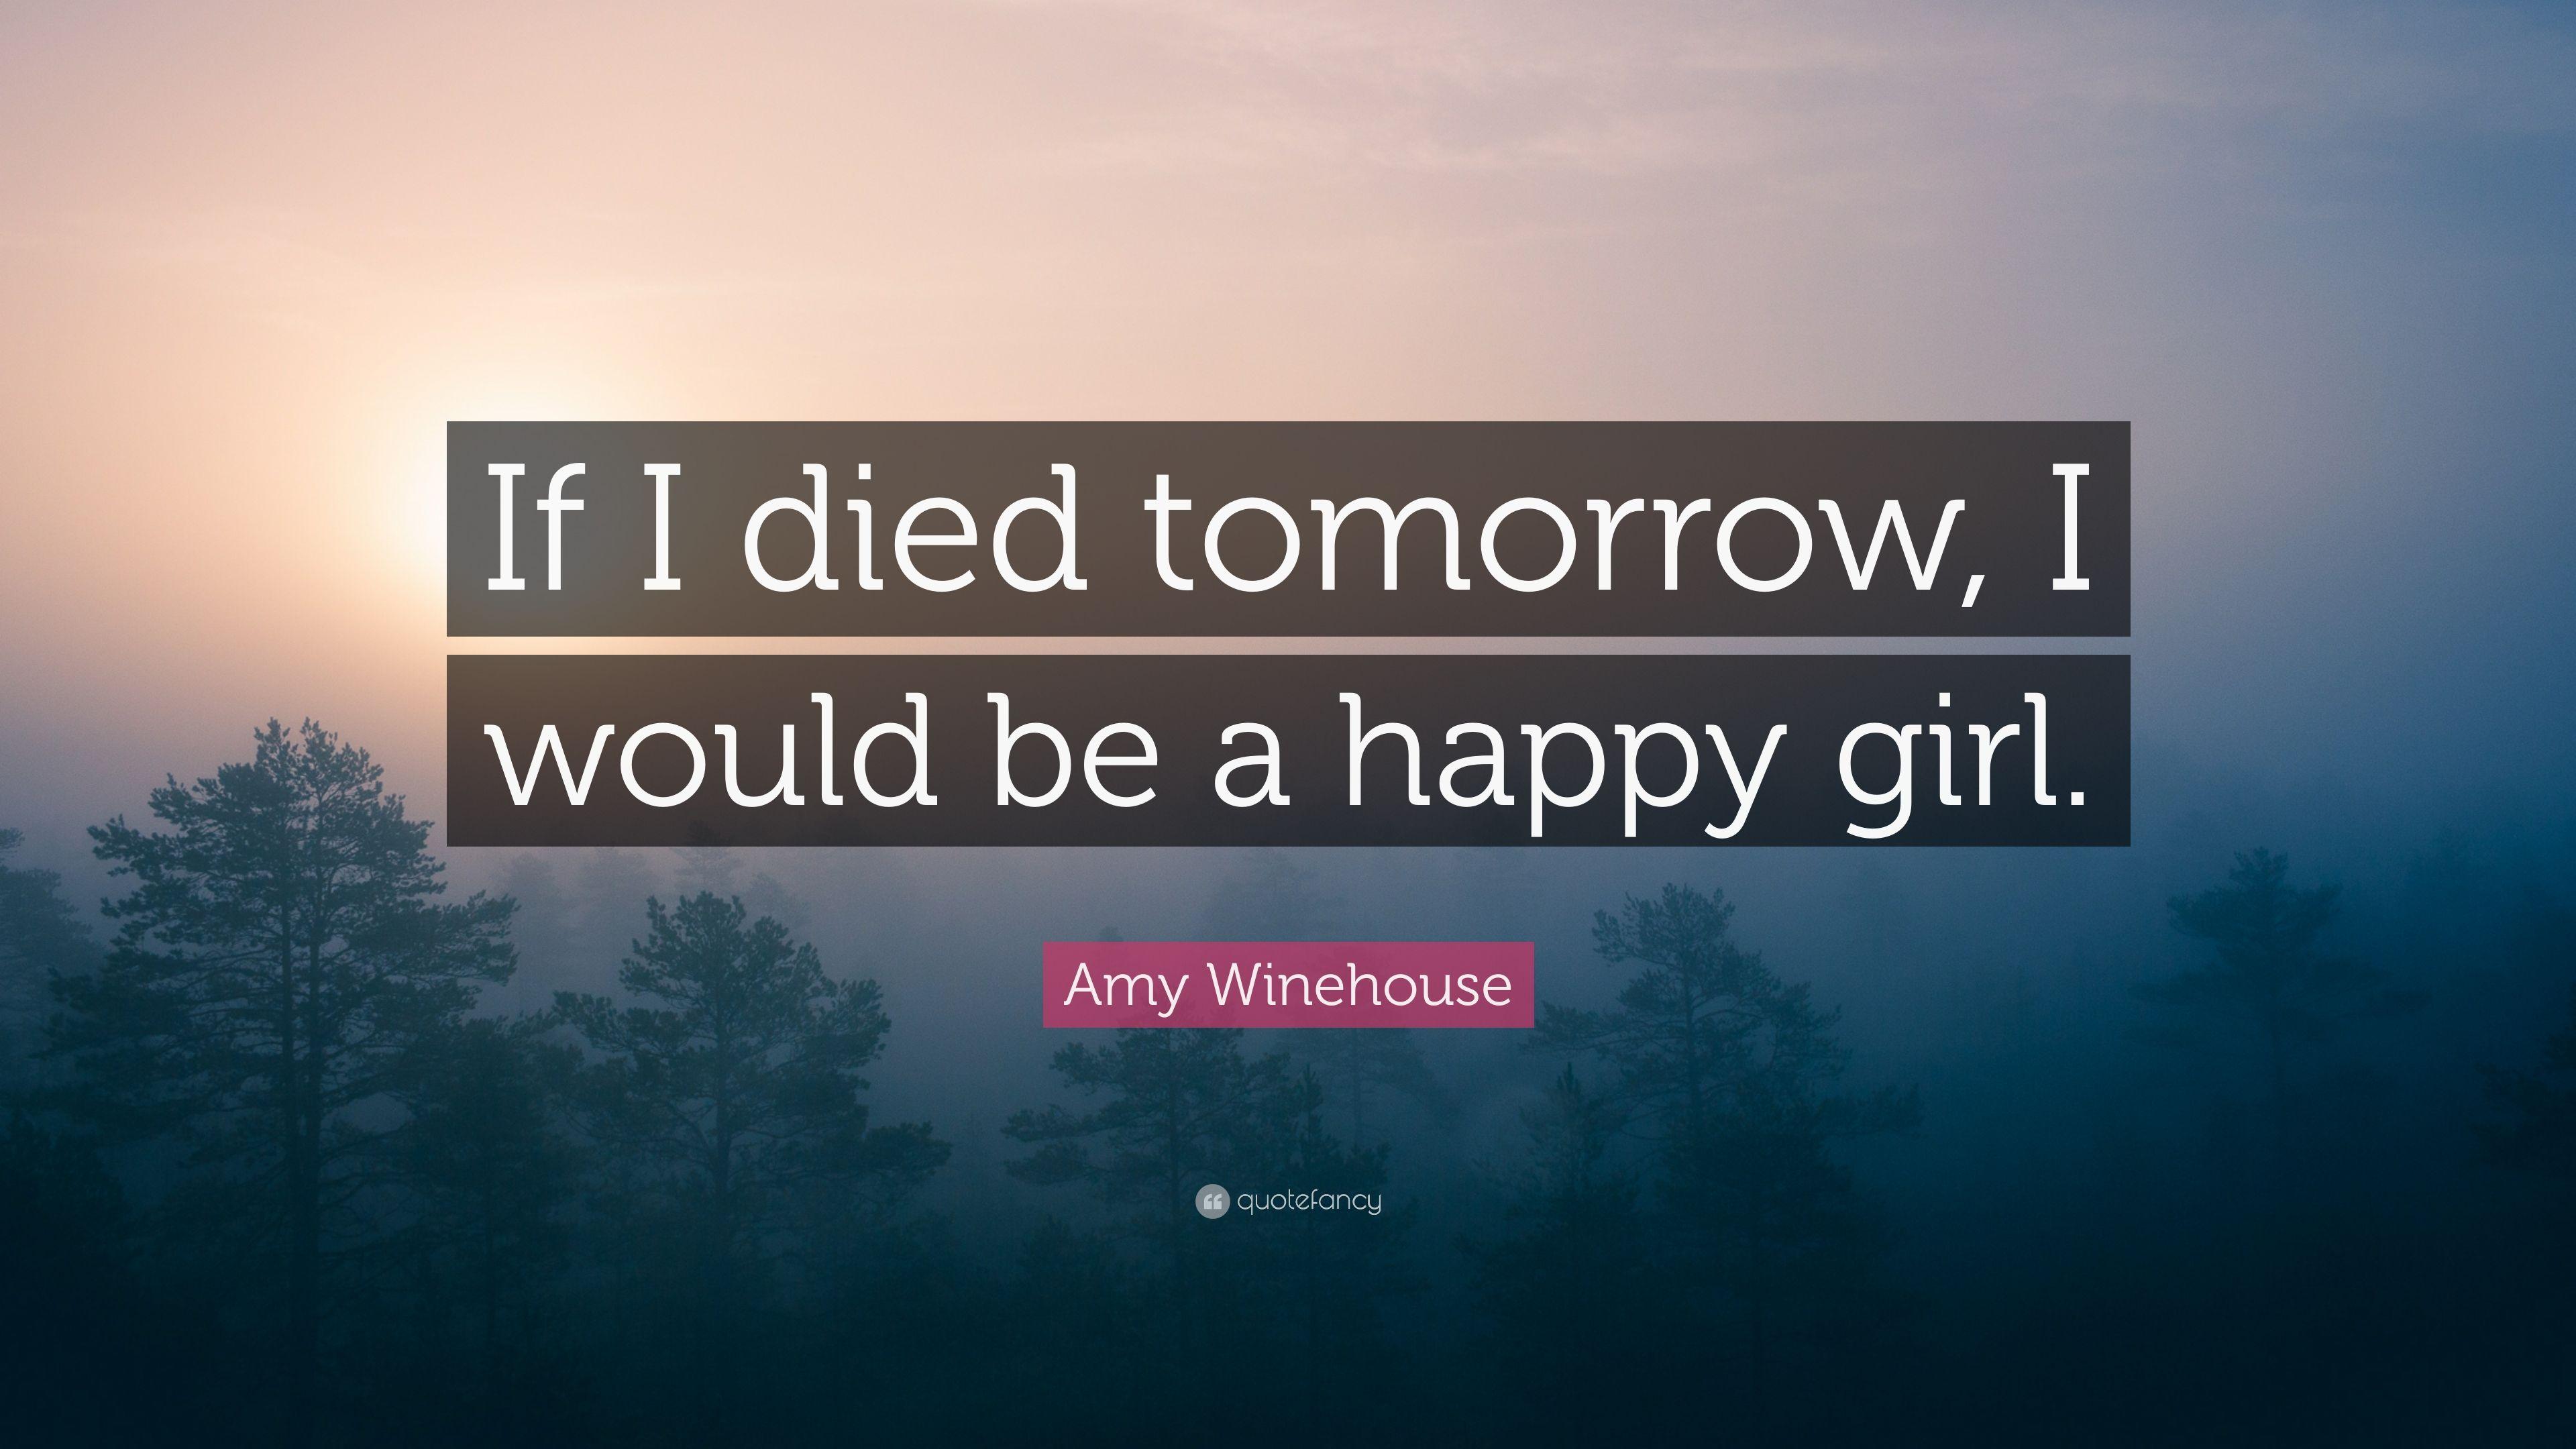 Amy Winehouse Quote: “If I died tomorrow, I would be a happy